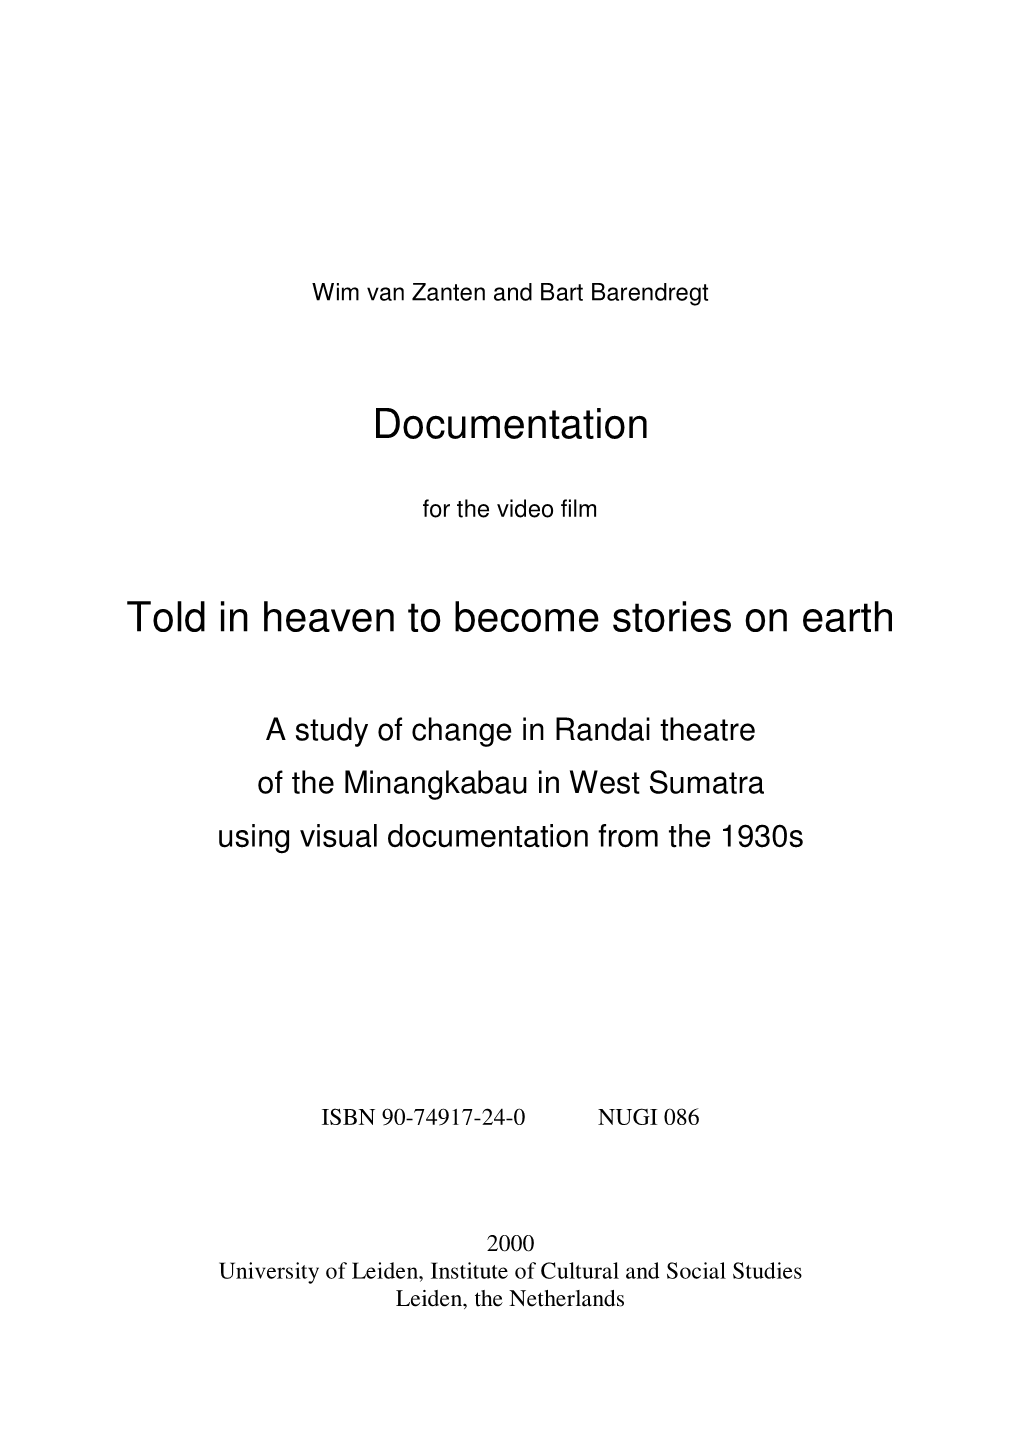 Documentation Told in Heaven to Become Stories on Earth